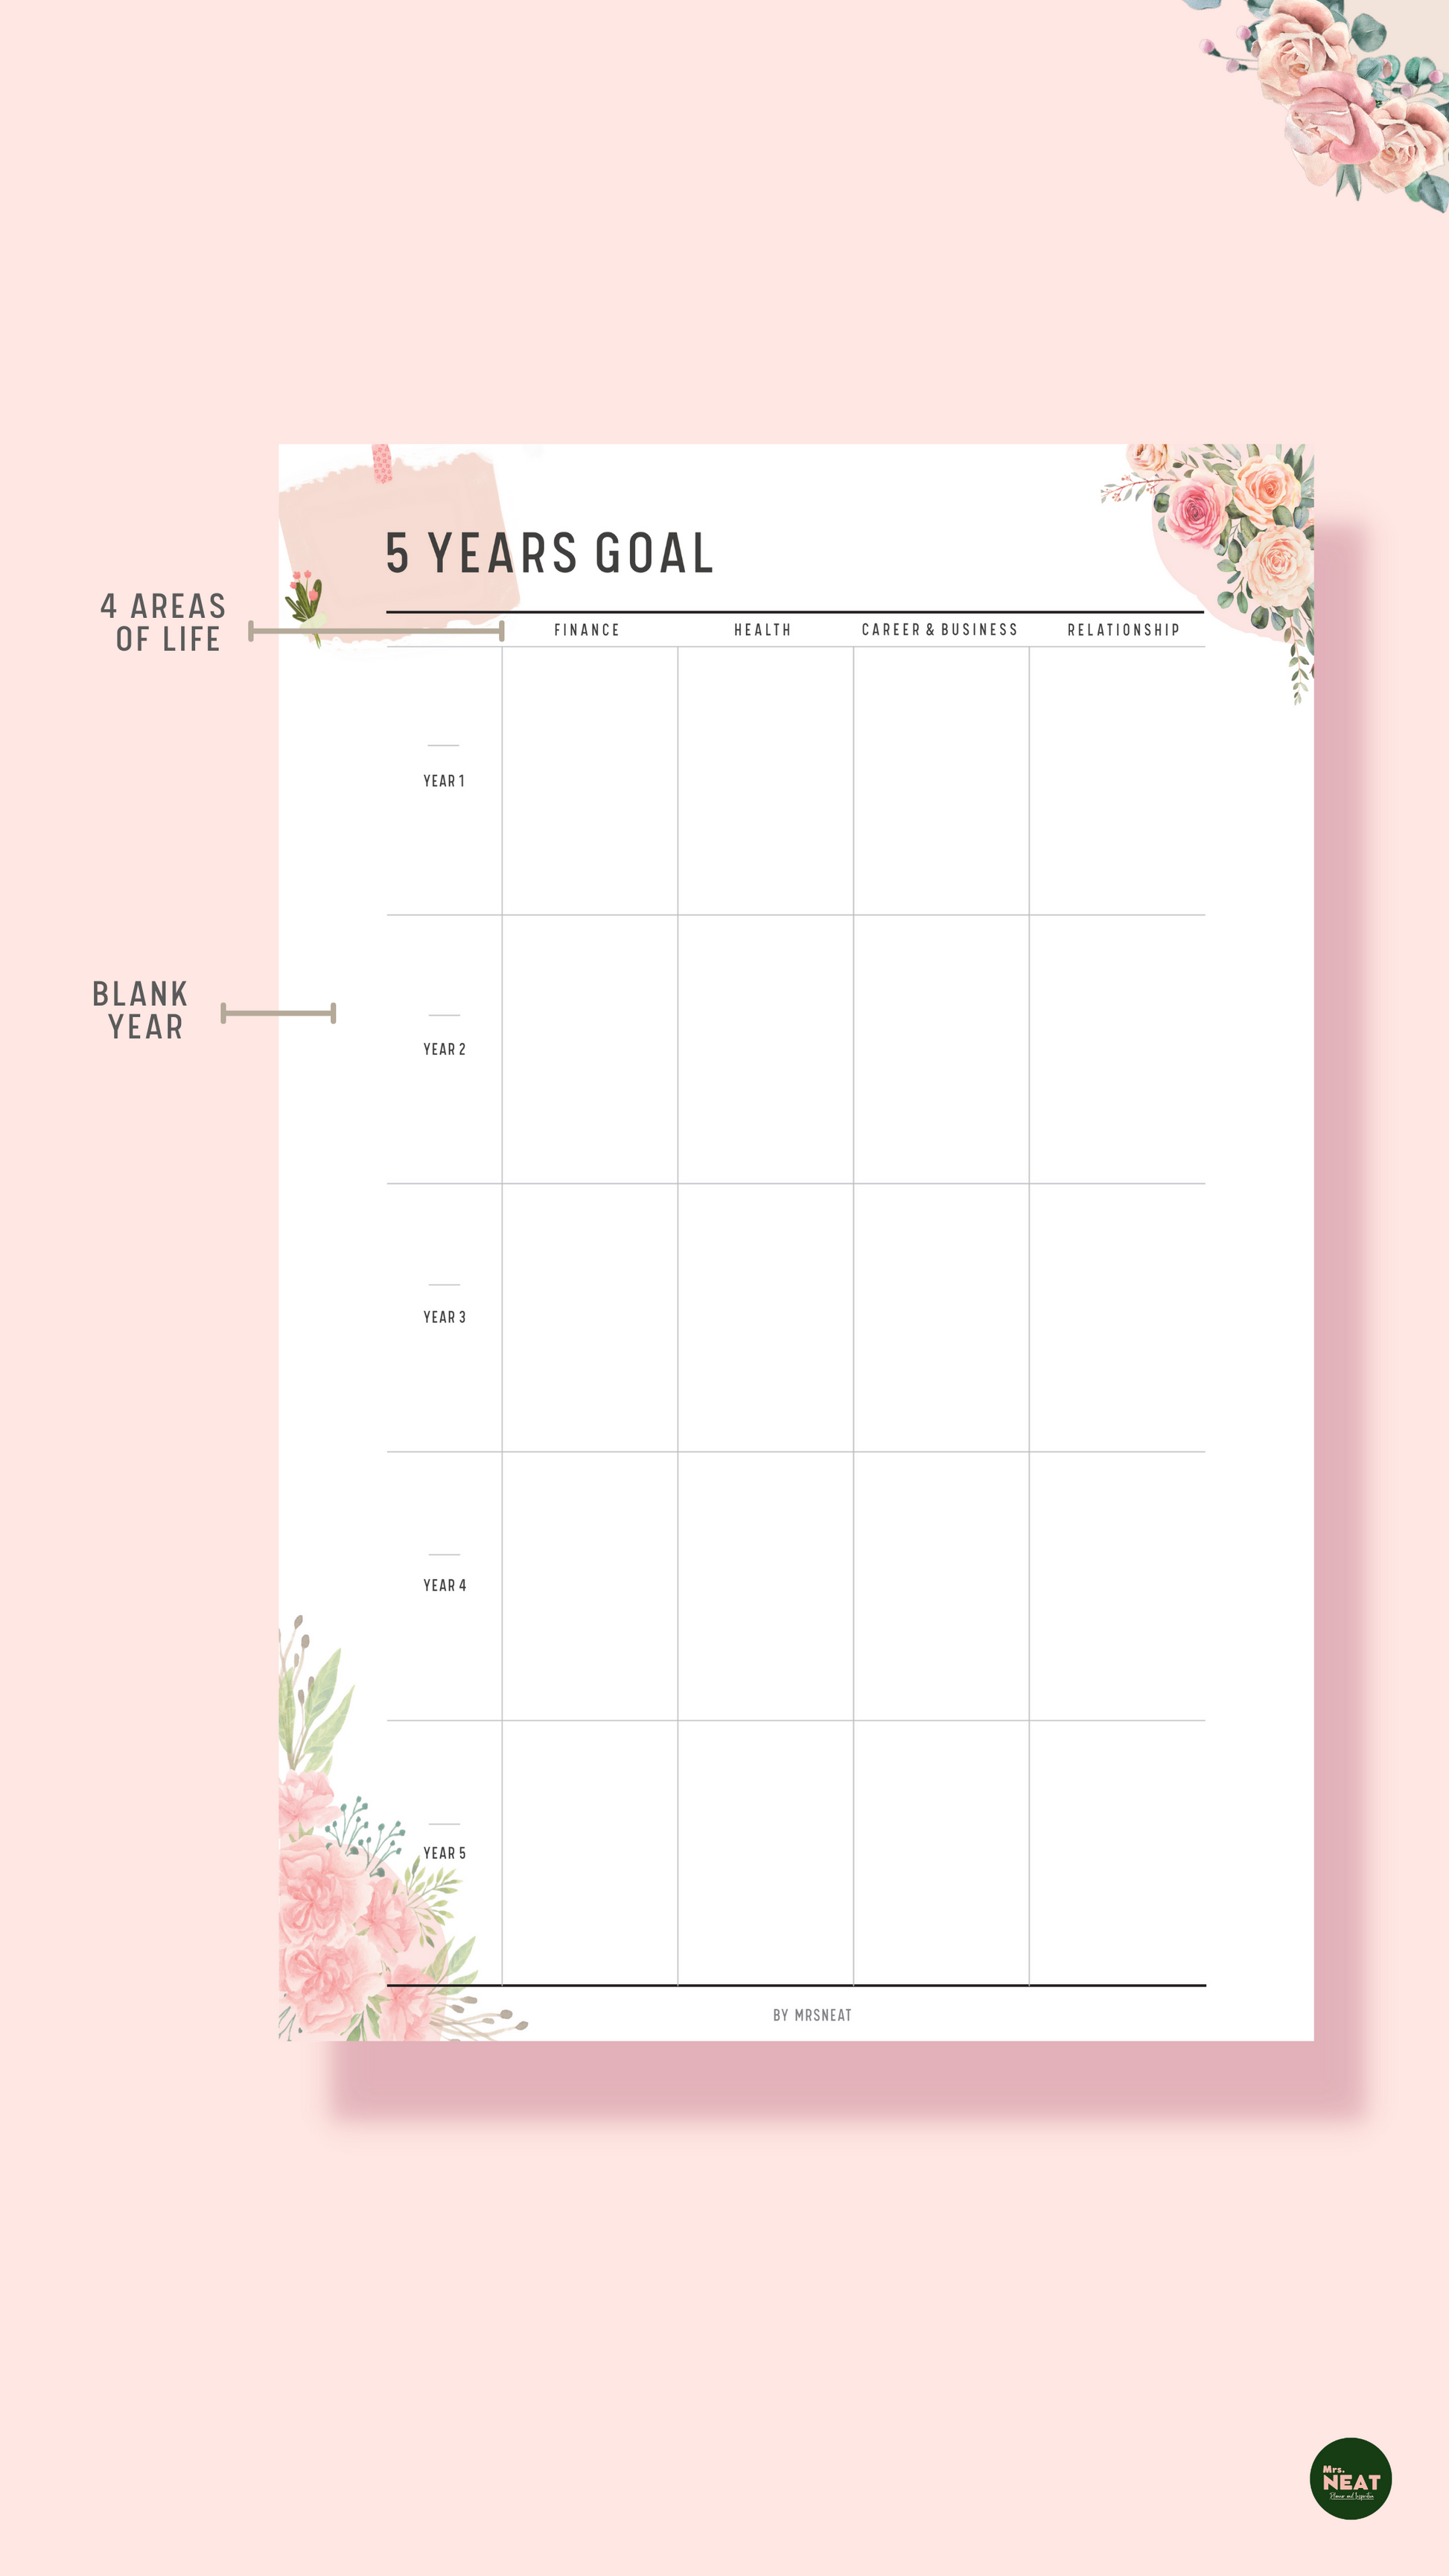 Floral 5 Year Goal Planner with room for 5 years and 4 areas of life, finance, health, career and relationship